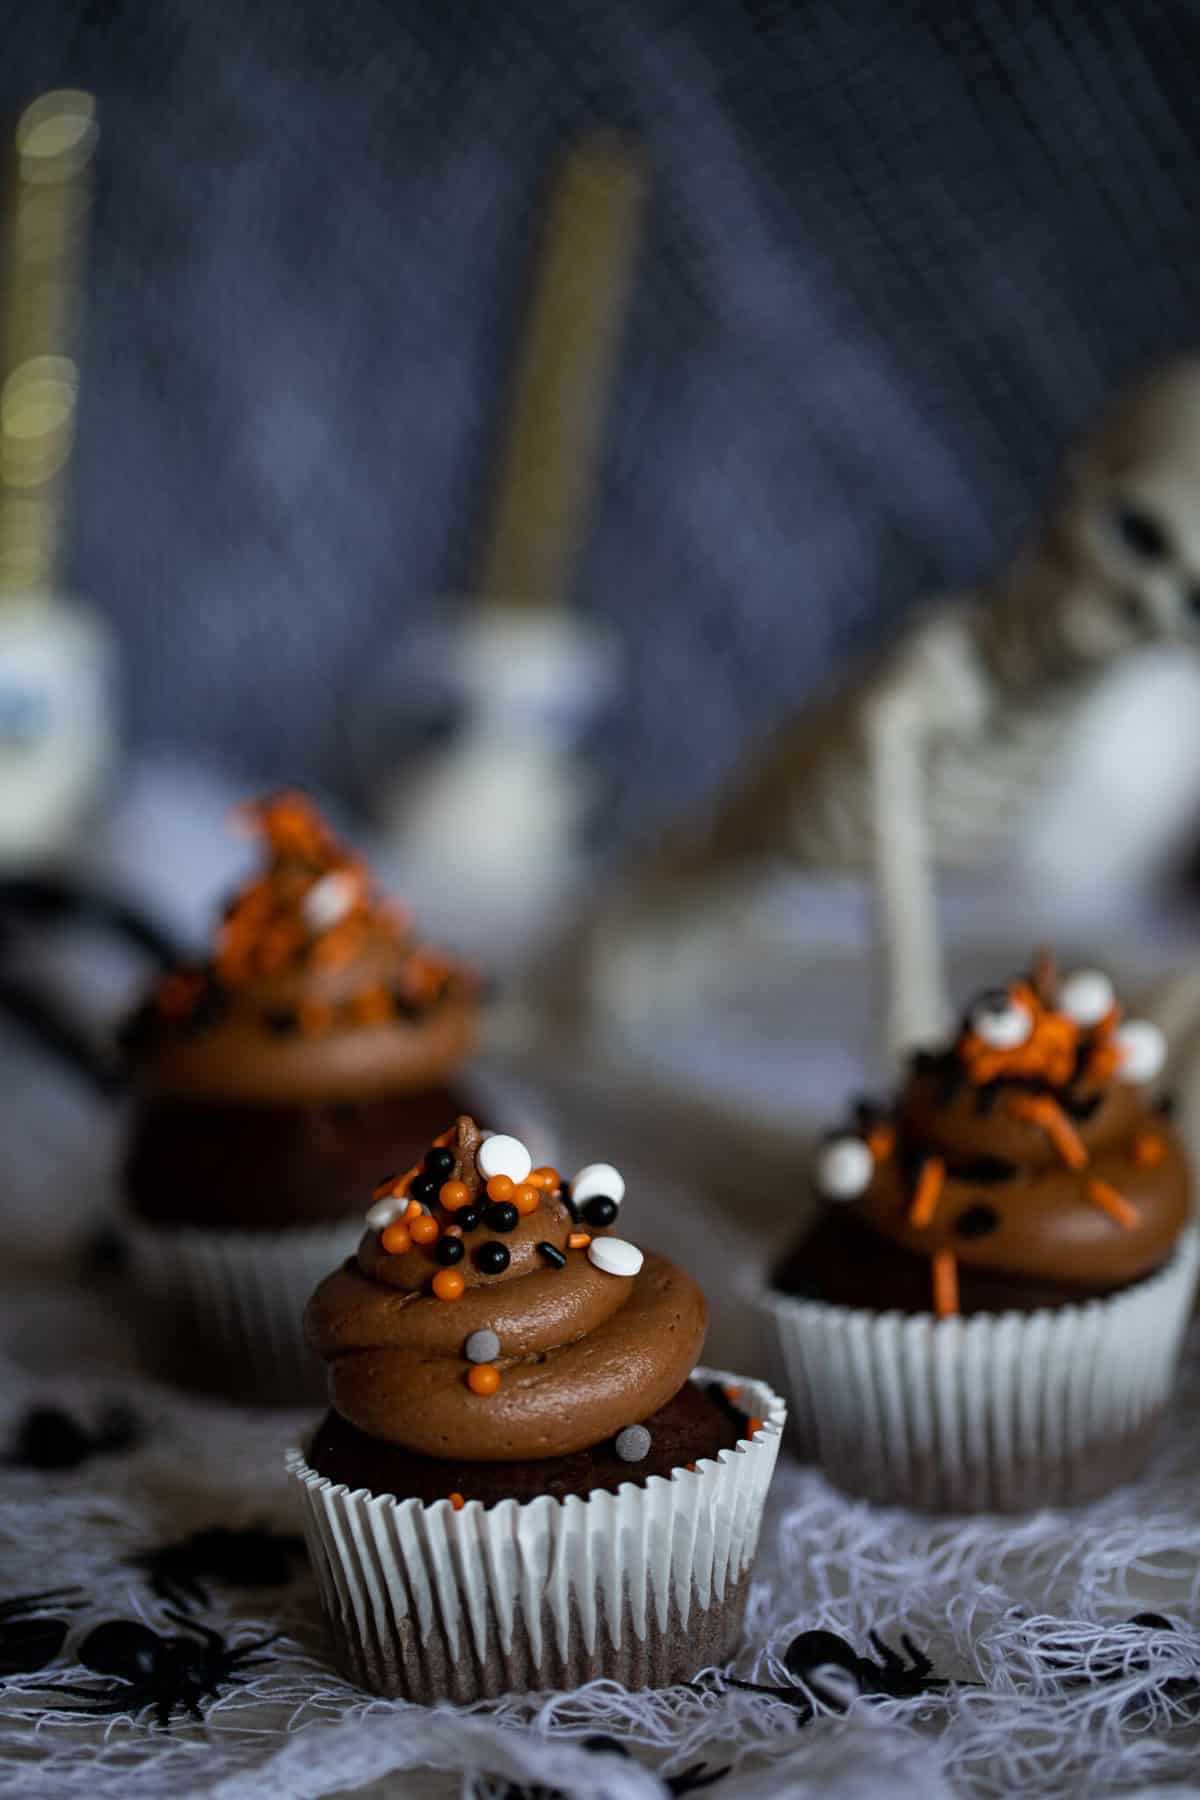 Spooky Double Chocolate Cupcakes with eye sprinkles.